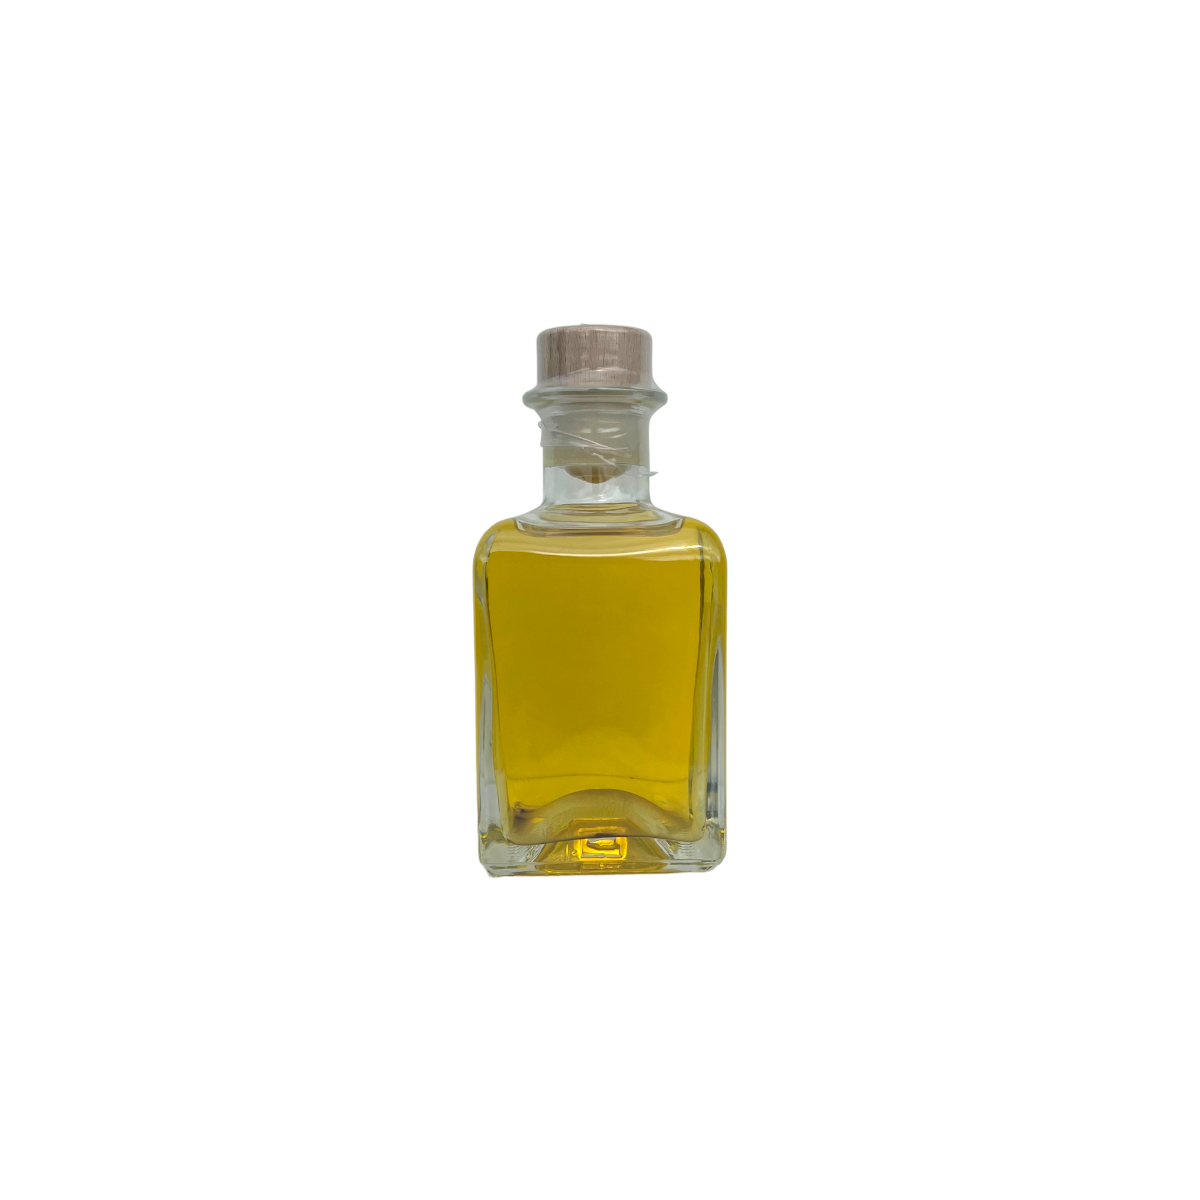 Sunflower oil with wild garlic extract